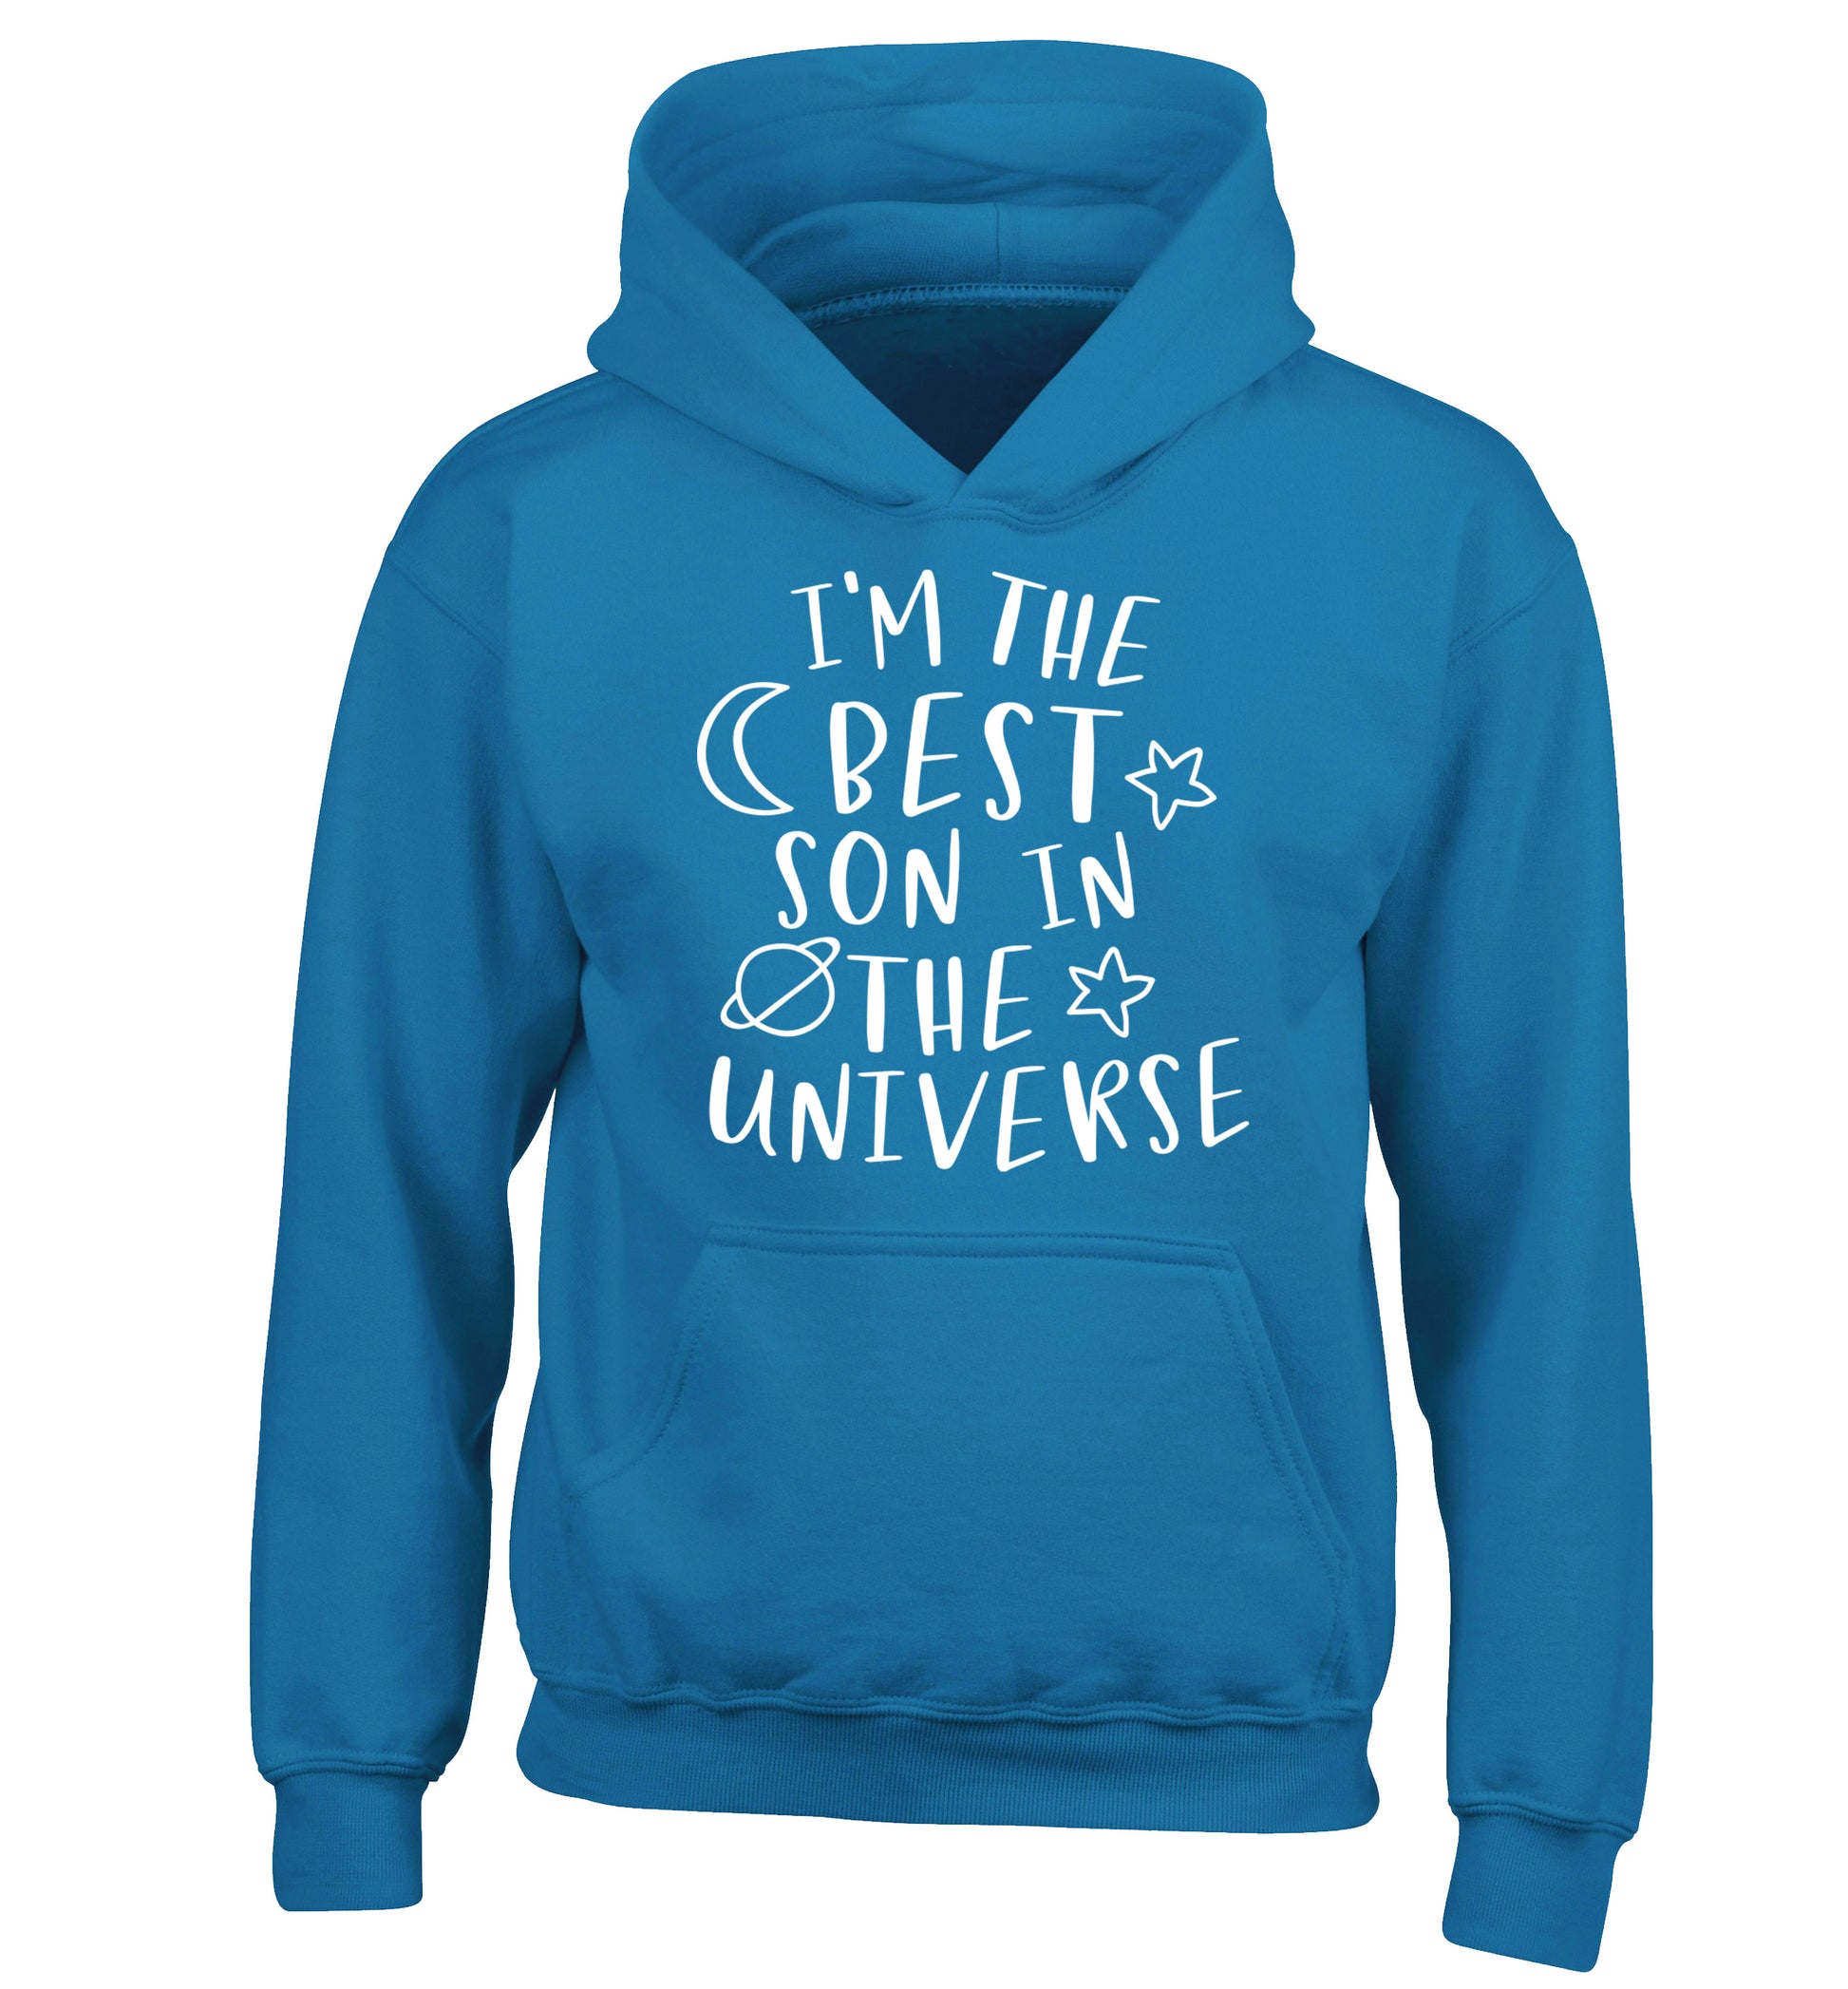 I'm the best son in the universe children's blue hoodie 12-13 Years